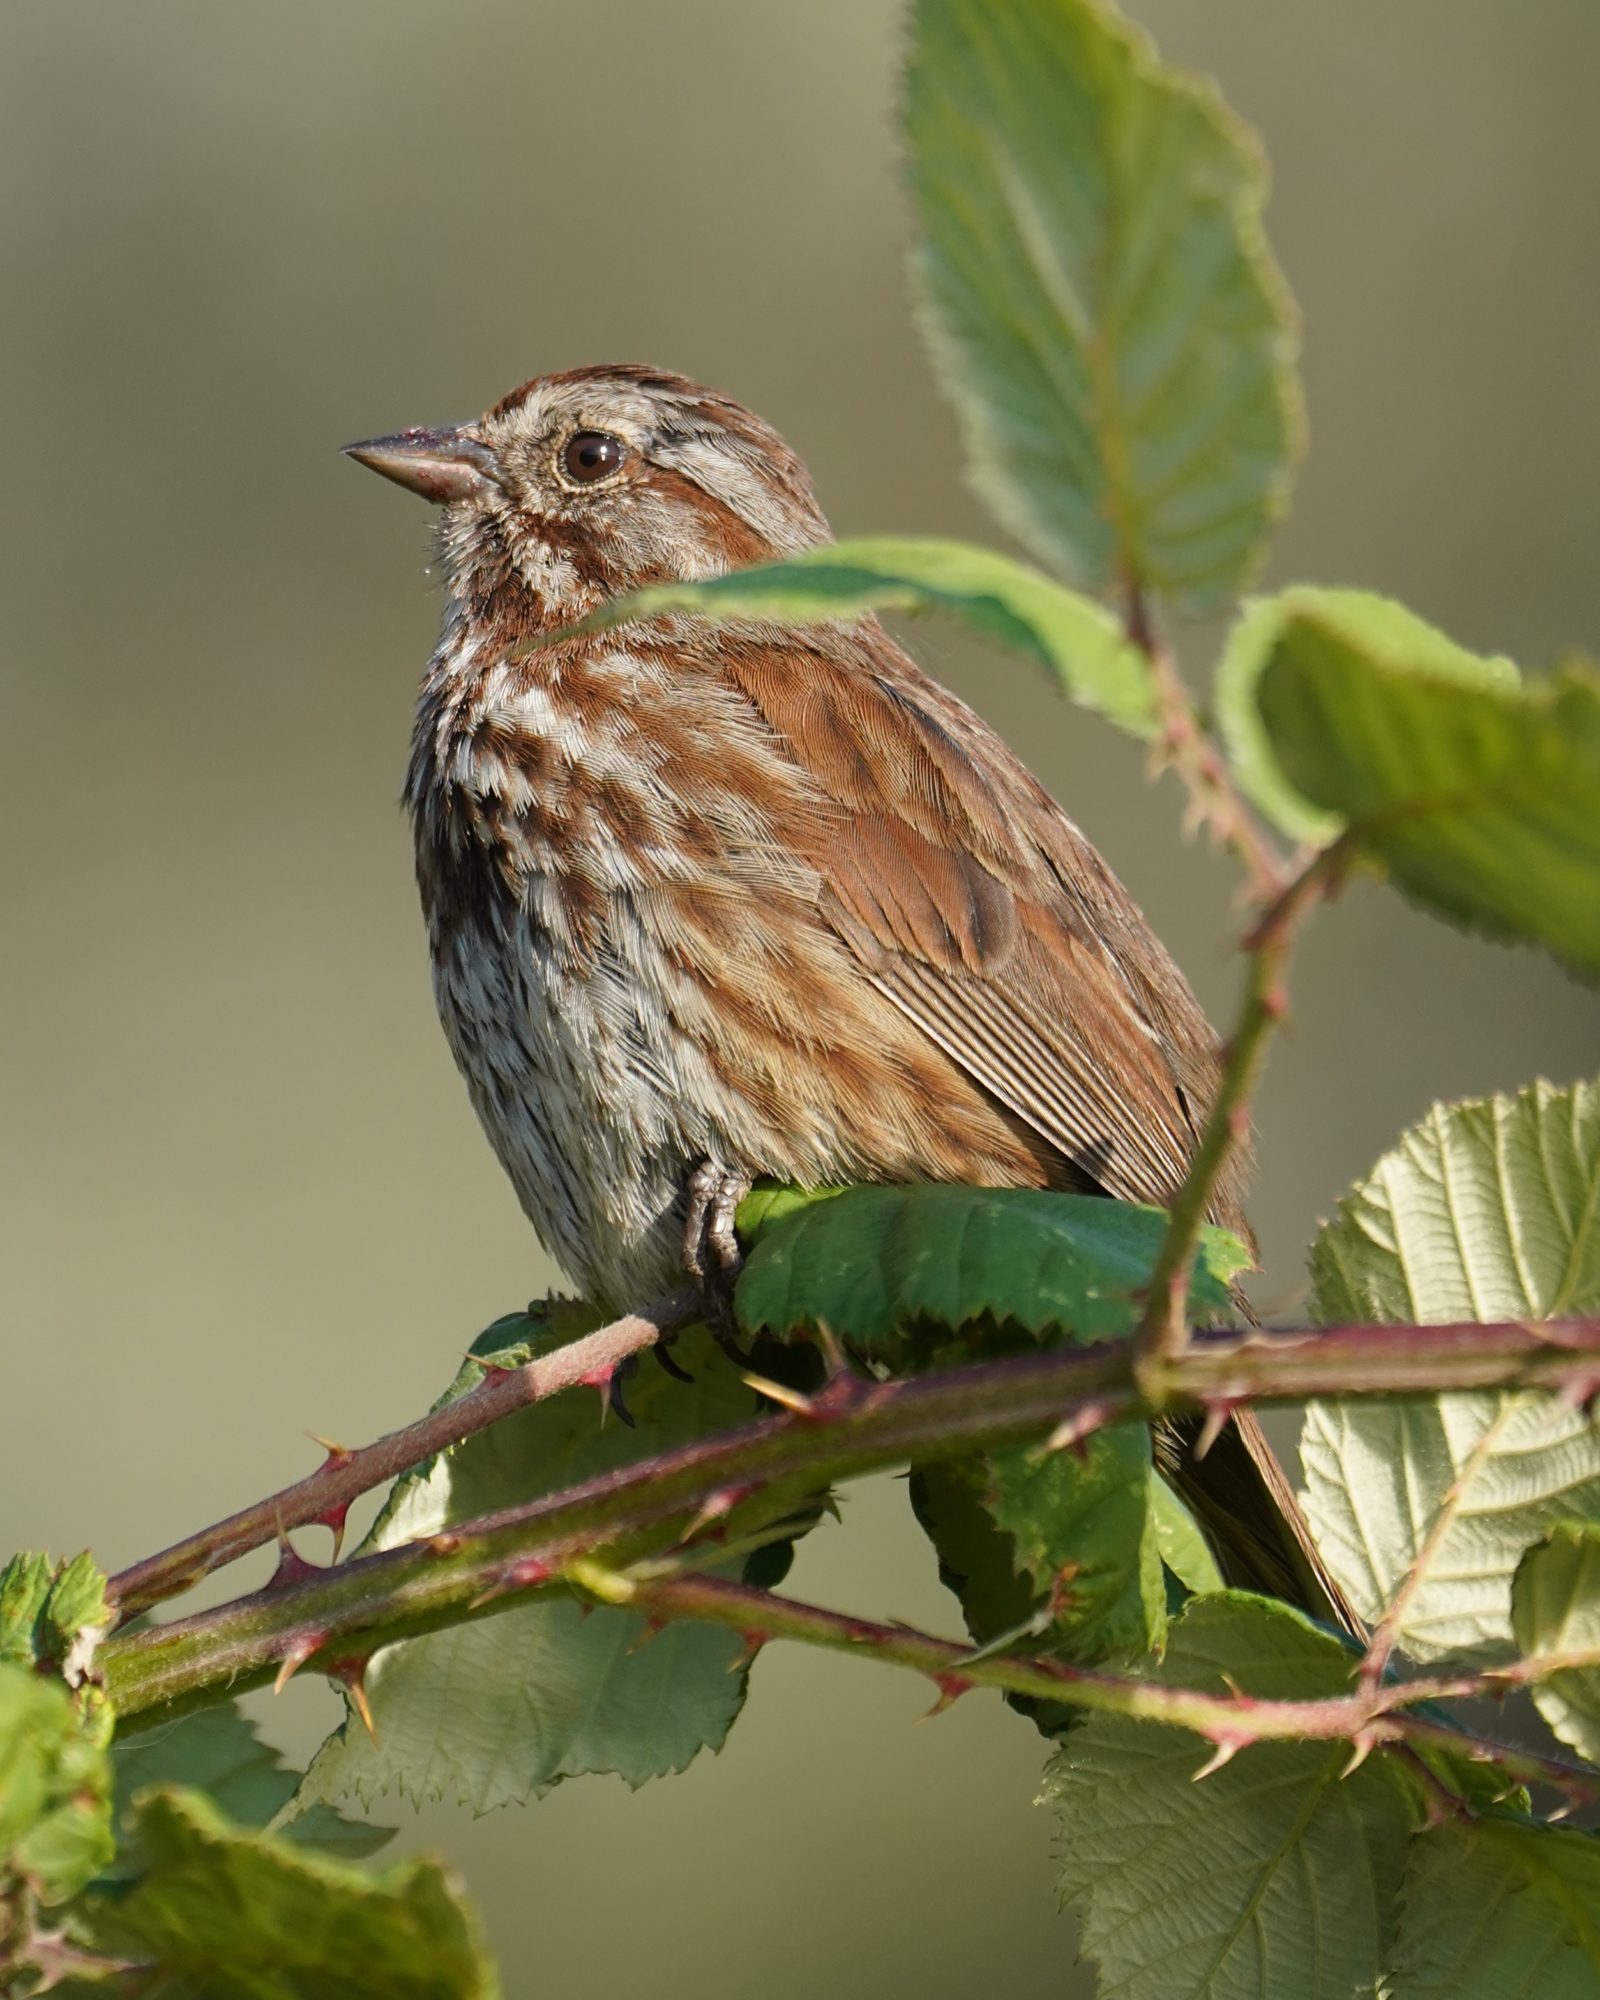 A Song Sparrow is sitting on a branch, partly hidden by a couple leaves.